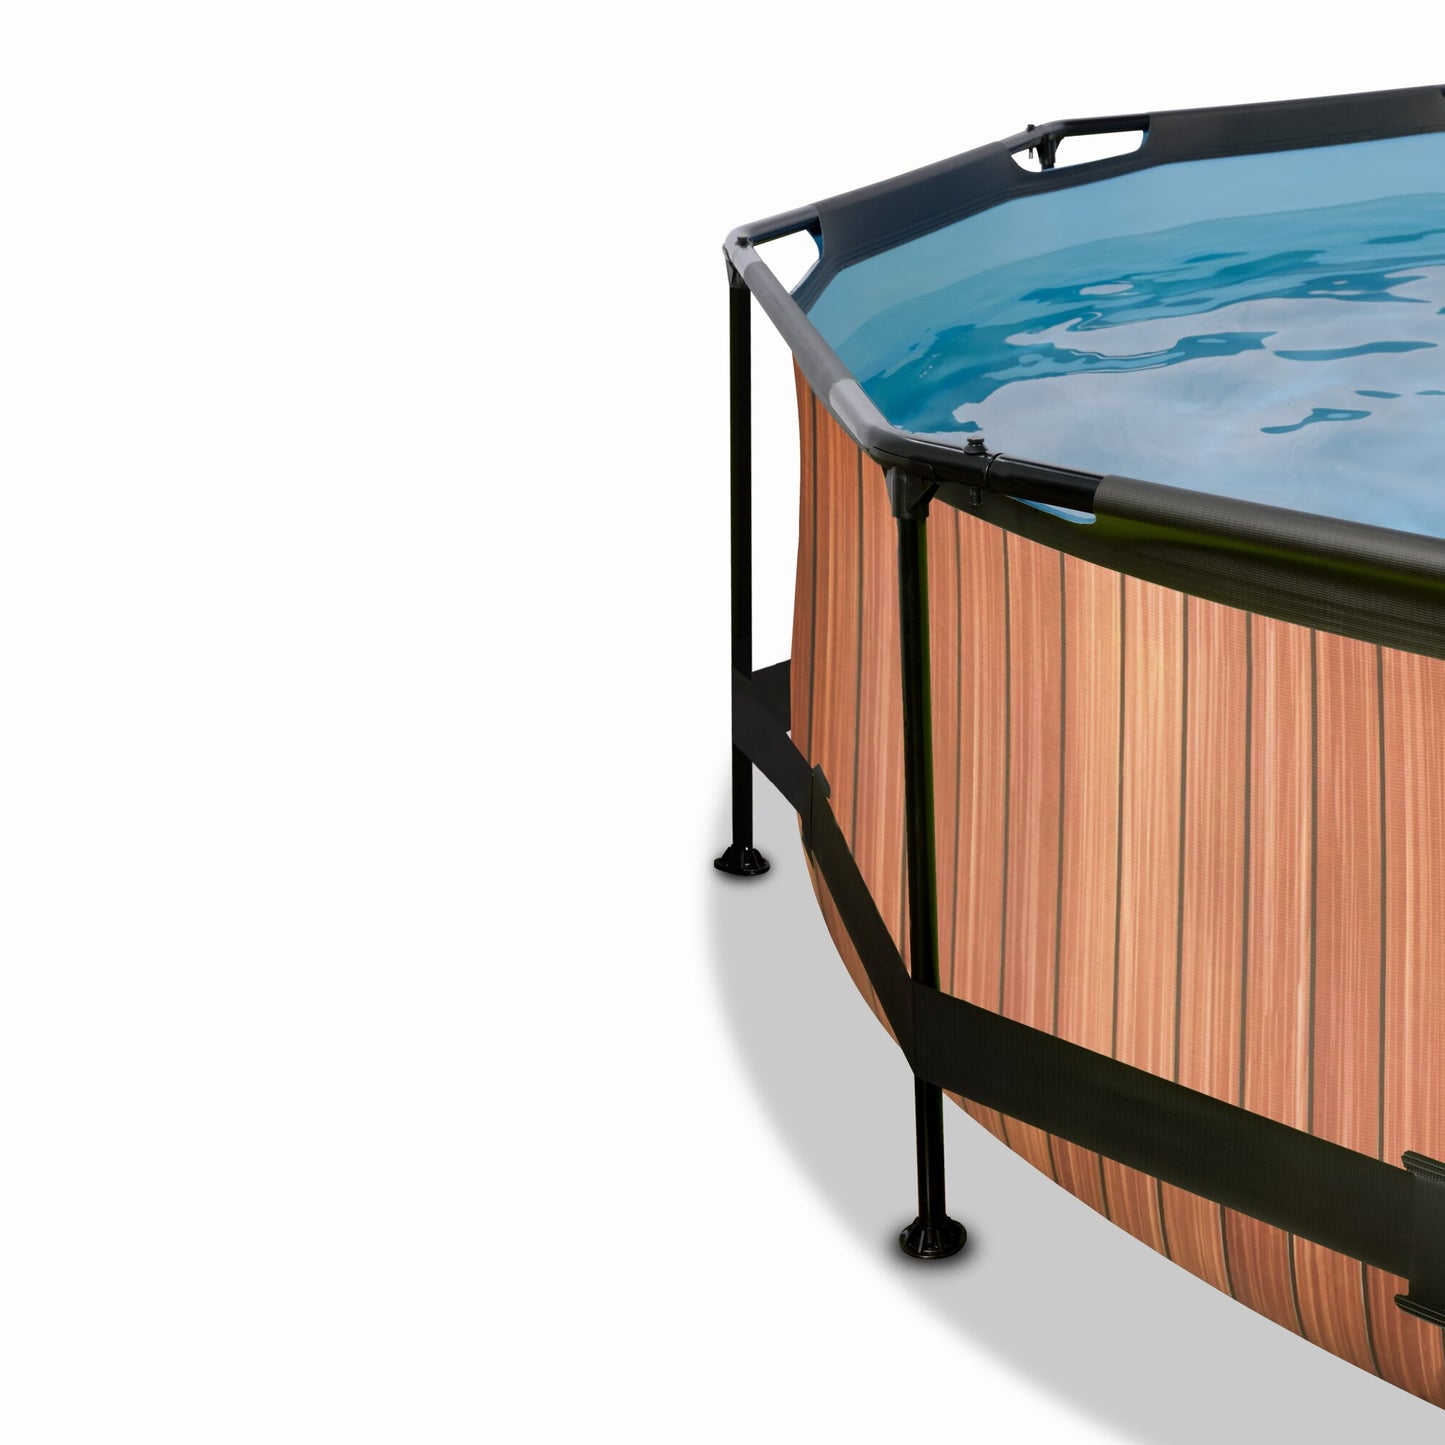 EXIT Wood Pool 12ft x76cm with Filter Pump - Wood